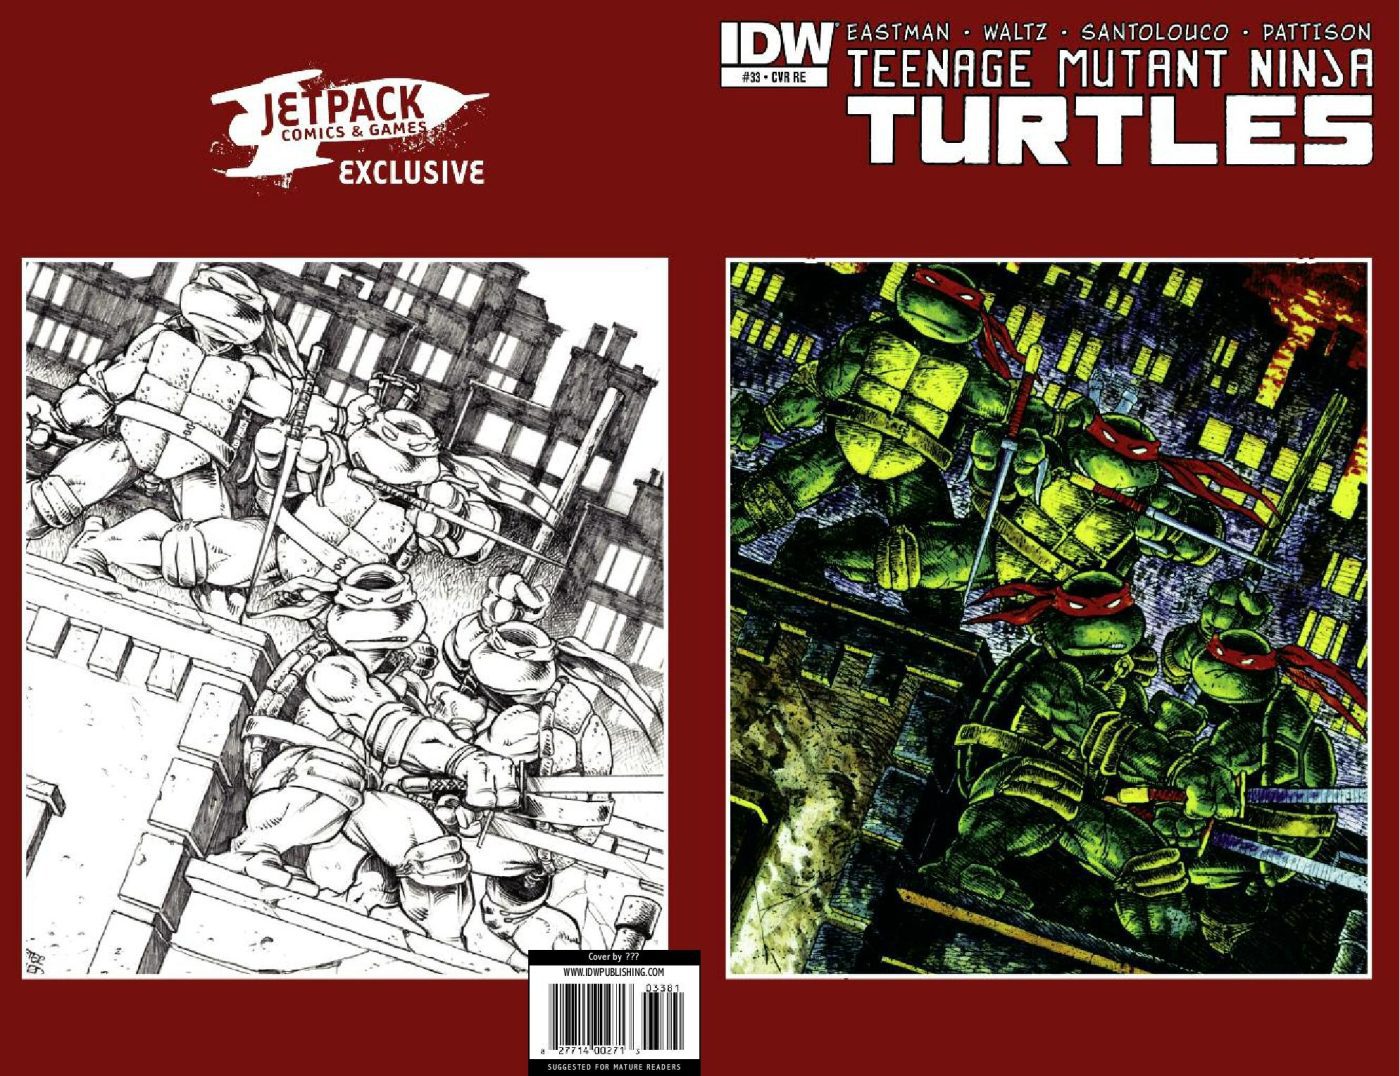 THE LAIRD TMNT #1 HOMAGE EDITION – TMNT #33 (Microprint edition very limited)